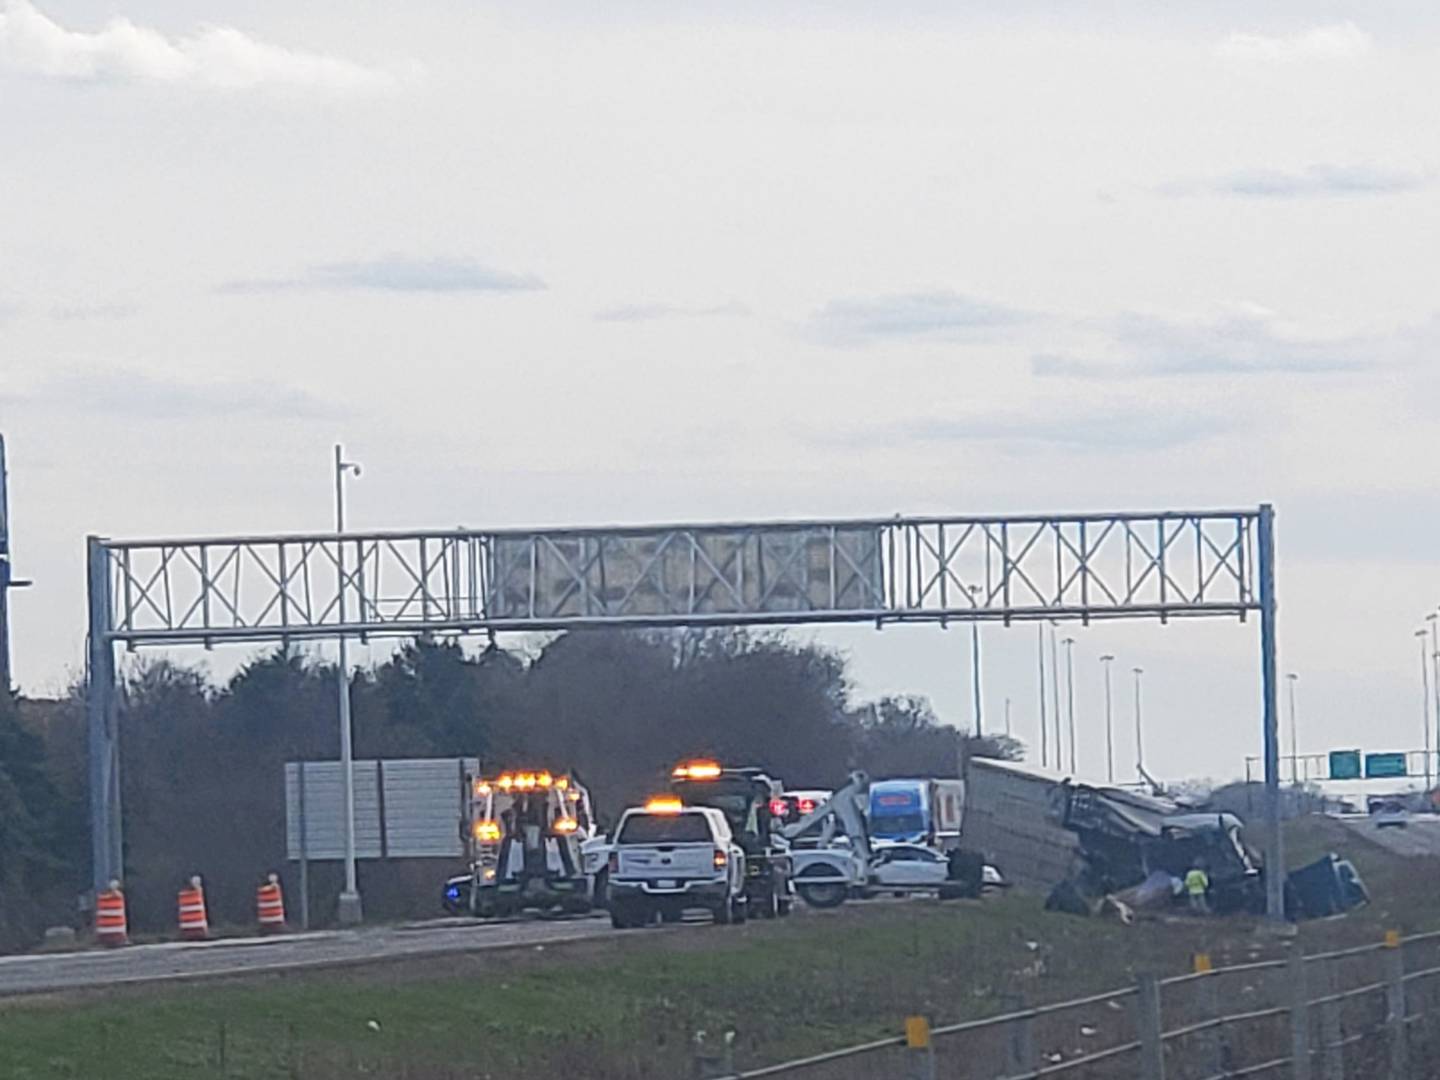 Cattle were loose Interstate 80, stopping eastbound lanes of traffic from Houbolt Road to Larkin Avenue, after a hauler was involved in a crash on Tuesday, April 19, 2022, Illinois State Police said.
(Photos courtesy of Michael Uylaki)